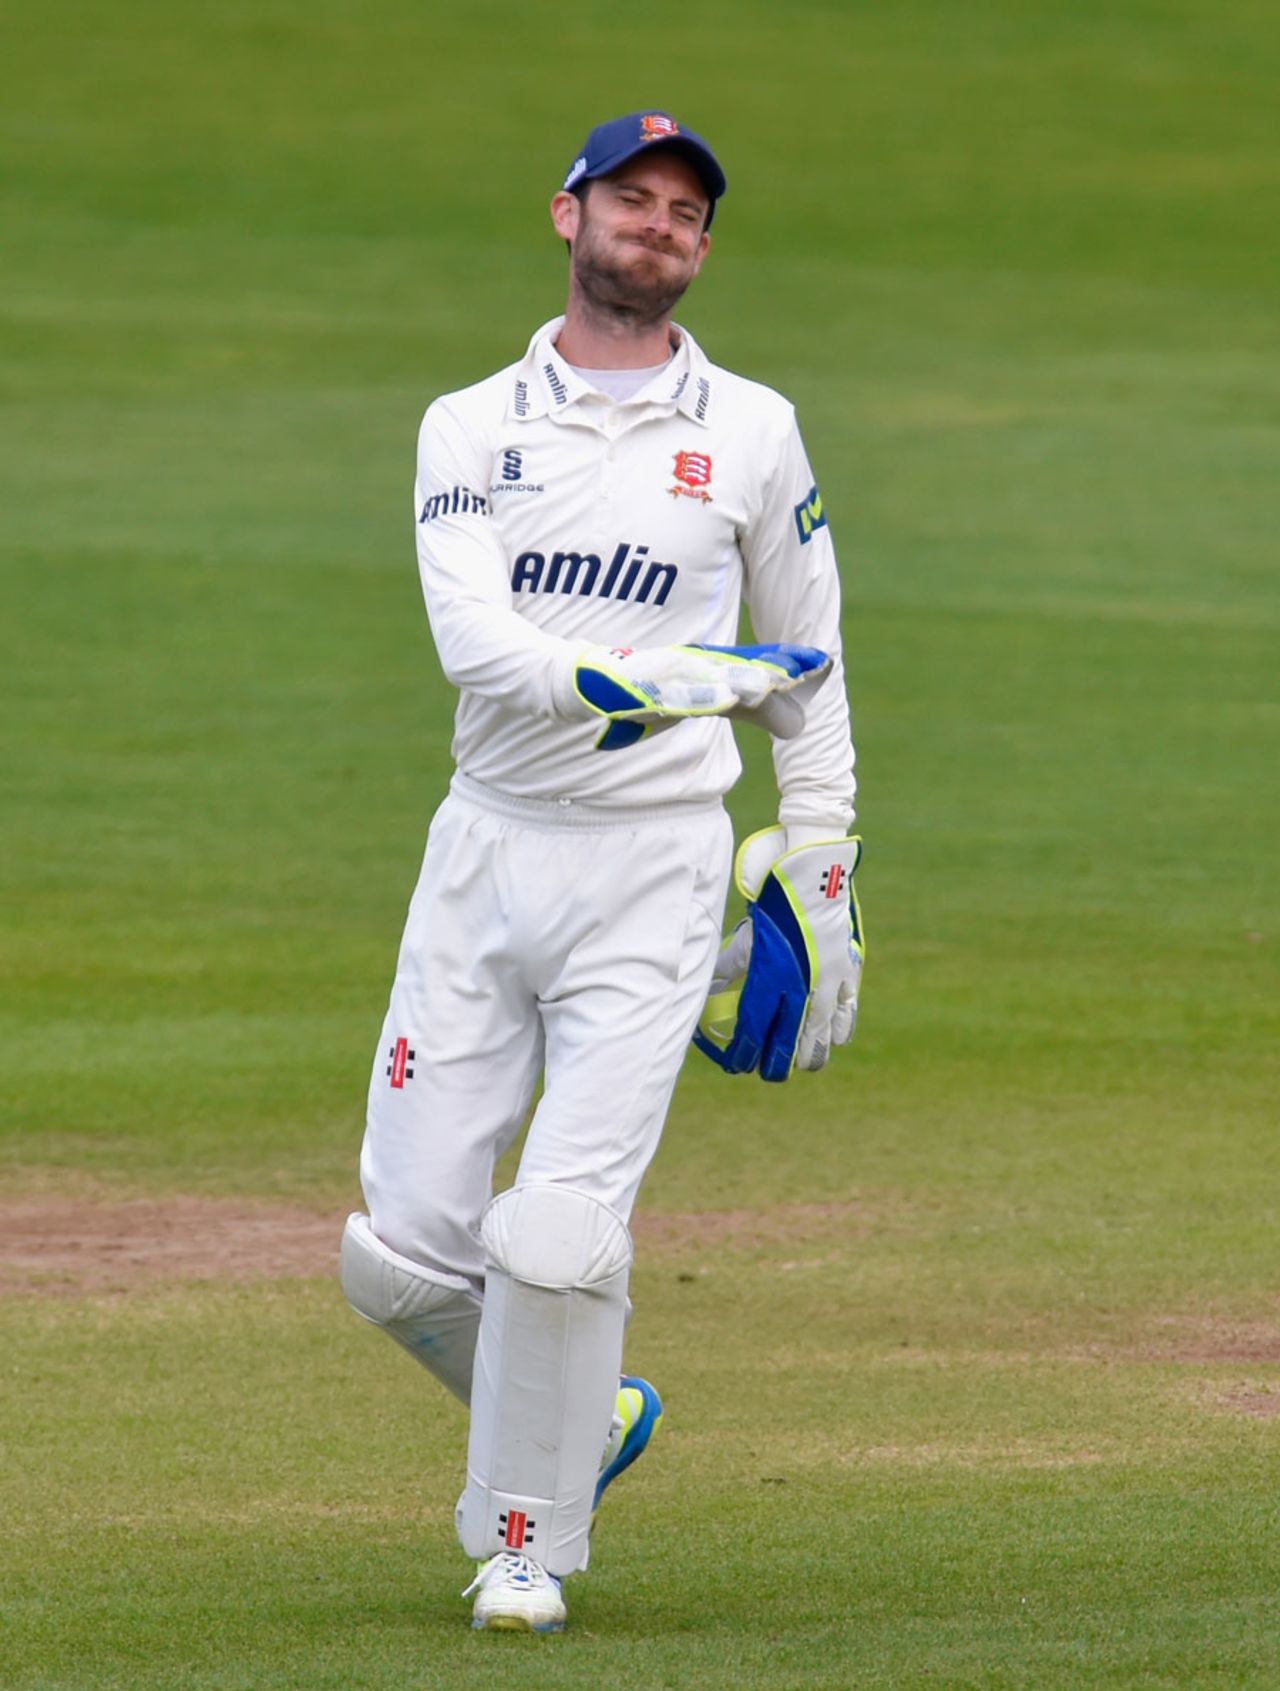 It was a frustrating day for James Foster, Glamorgan v Essex, County Championship, Division Two, Cardiff, 3rd day, May 20, 2015